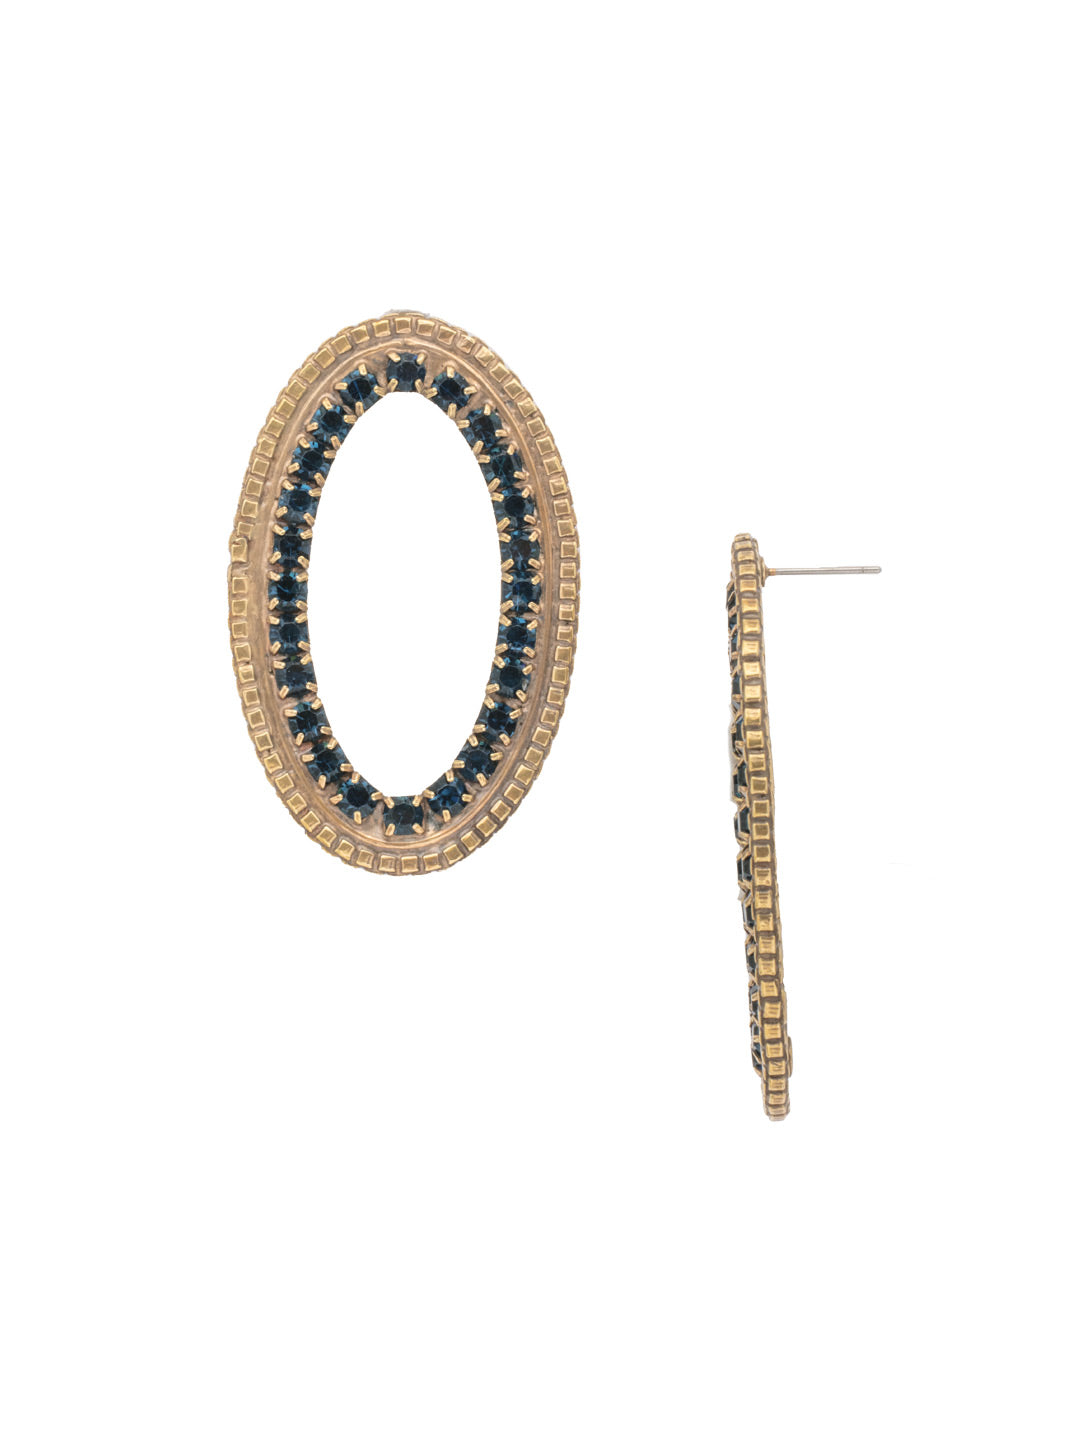 Sierra Statement Earring - EFC46AGVBN - <p>The Sierra Statement Earrings feature a dramatic oval hoop style with studded crystals. From Sorrelli's Venice Blue collection in our Antique Gold-tone finish.</p>